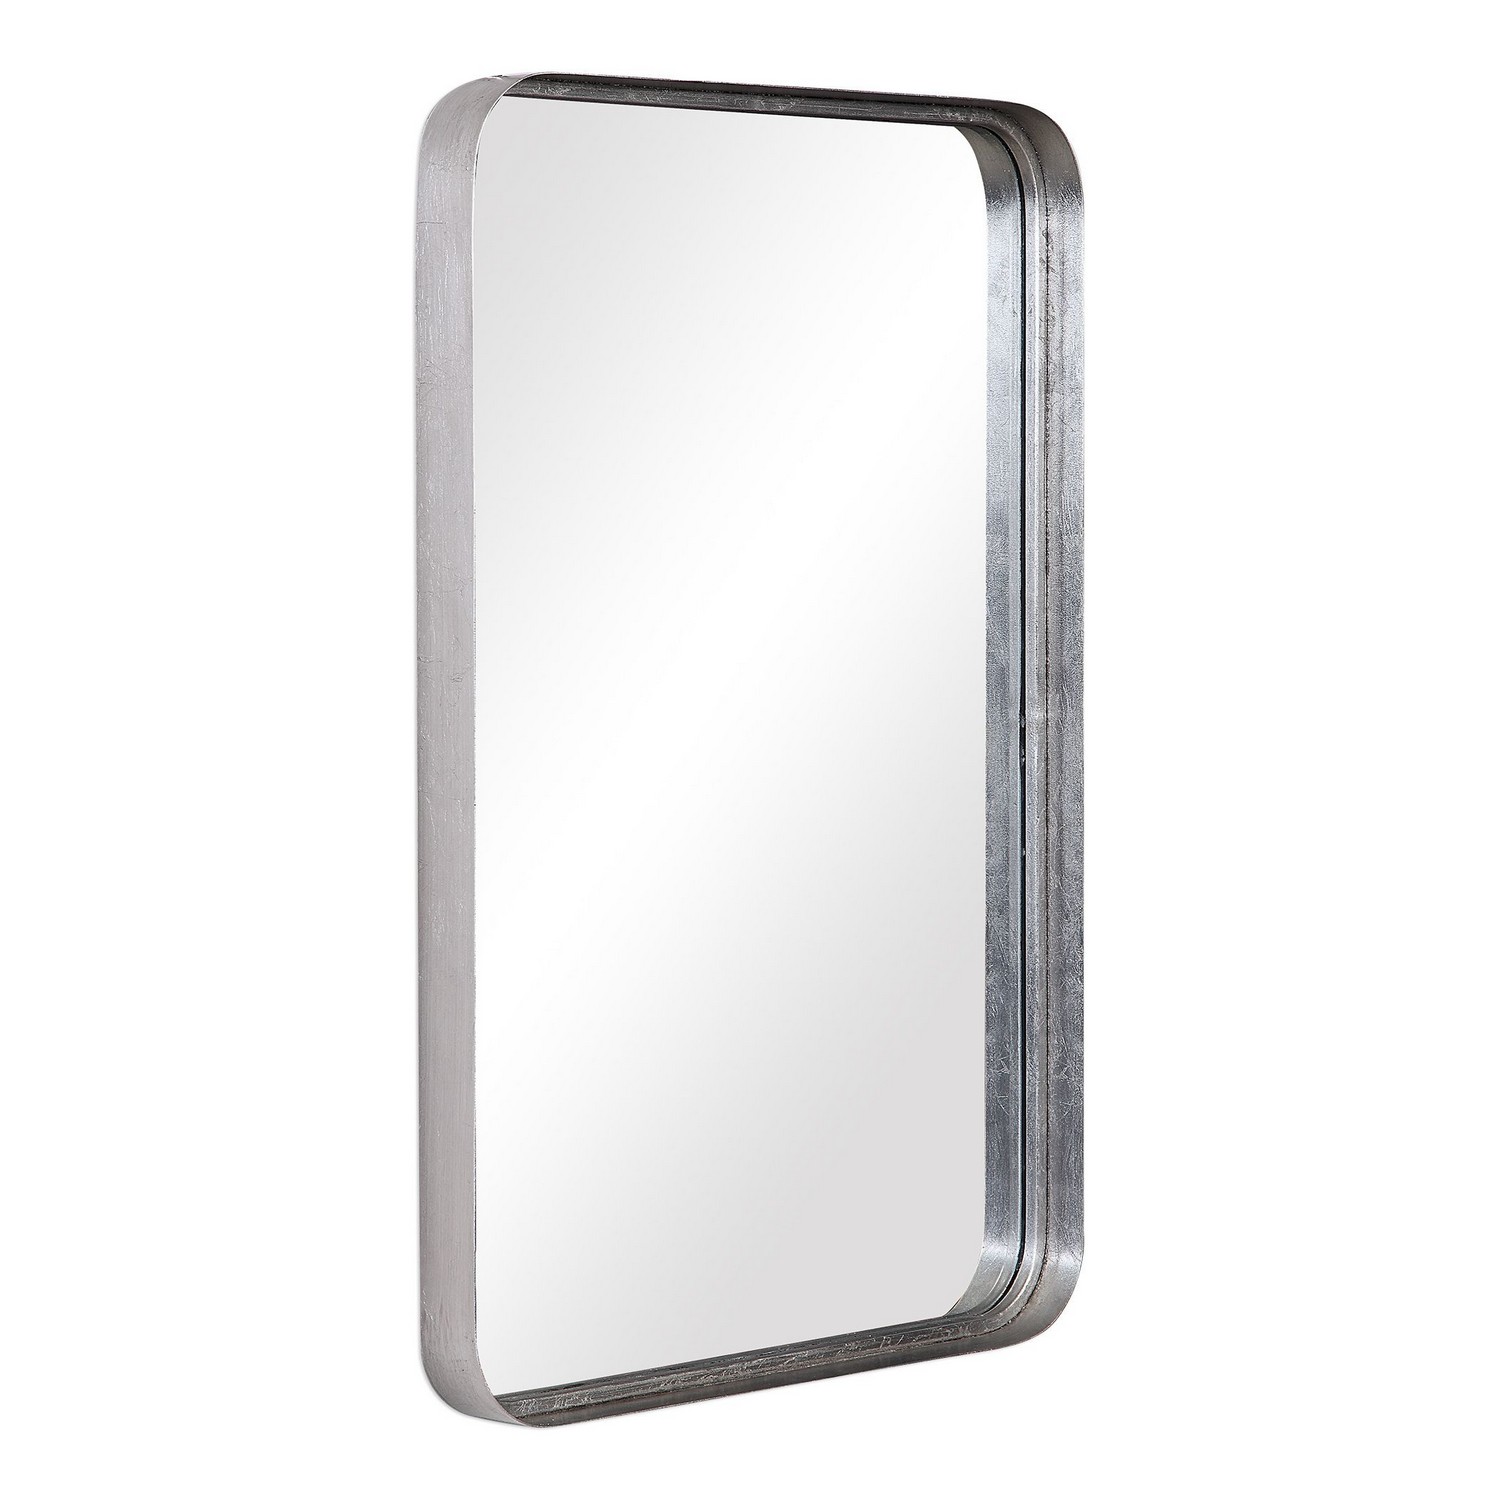 ABC Accent ABC-00451 Mirror - Burnished Silver Leaf